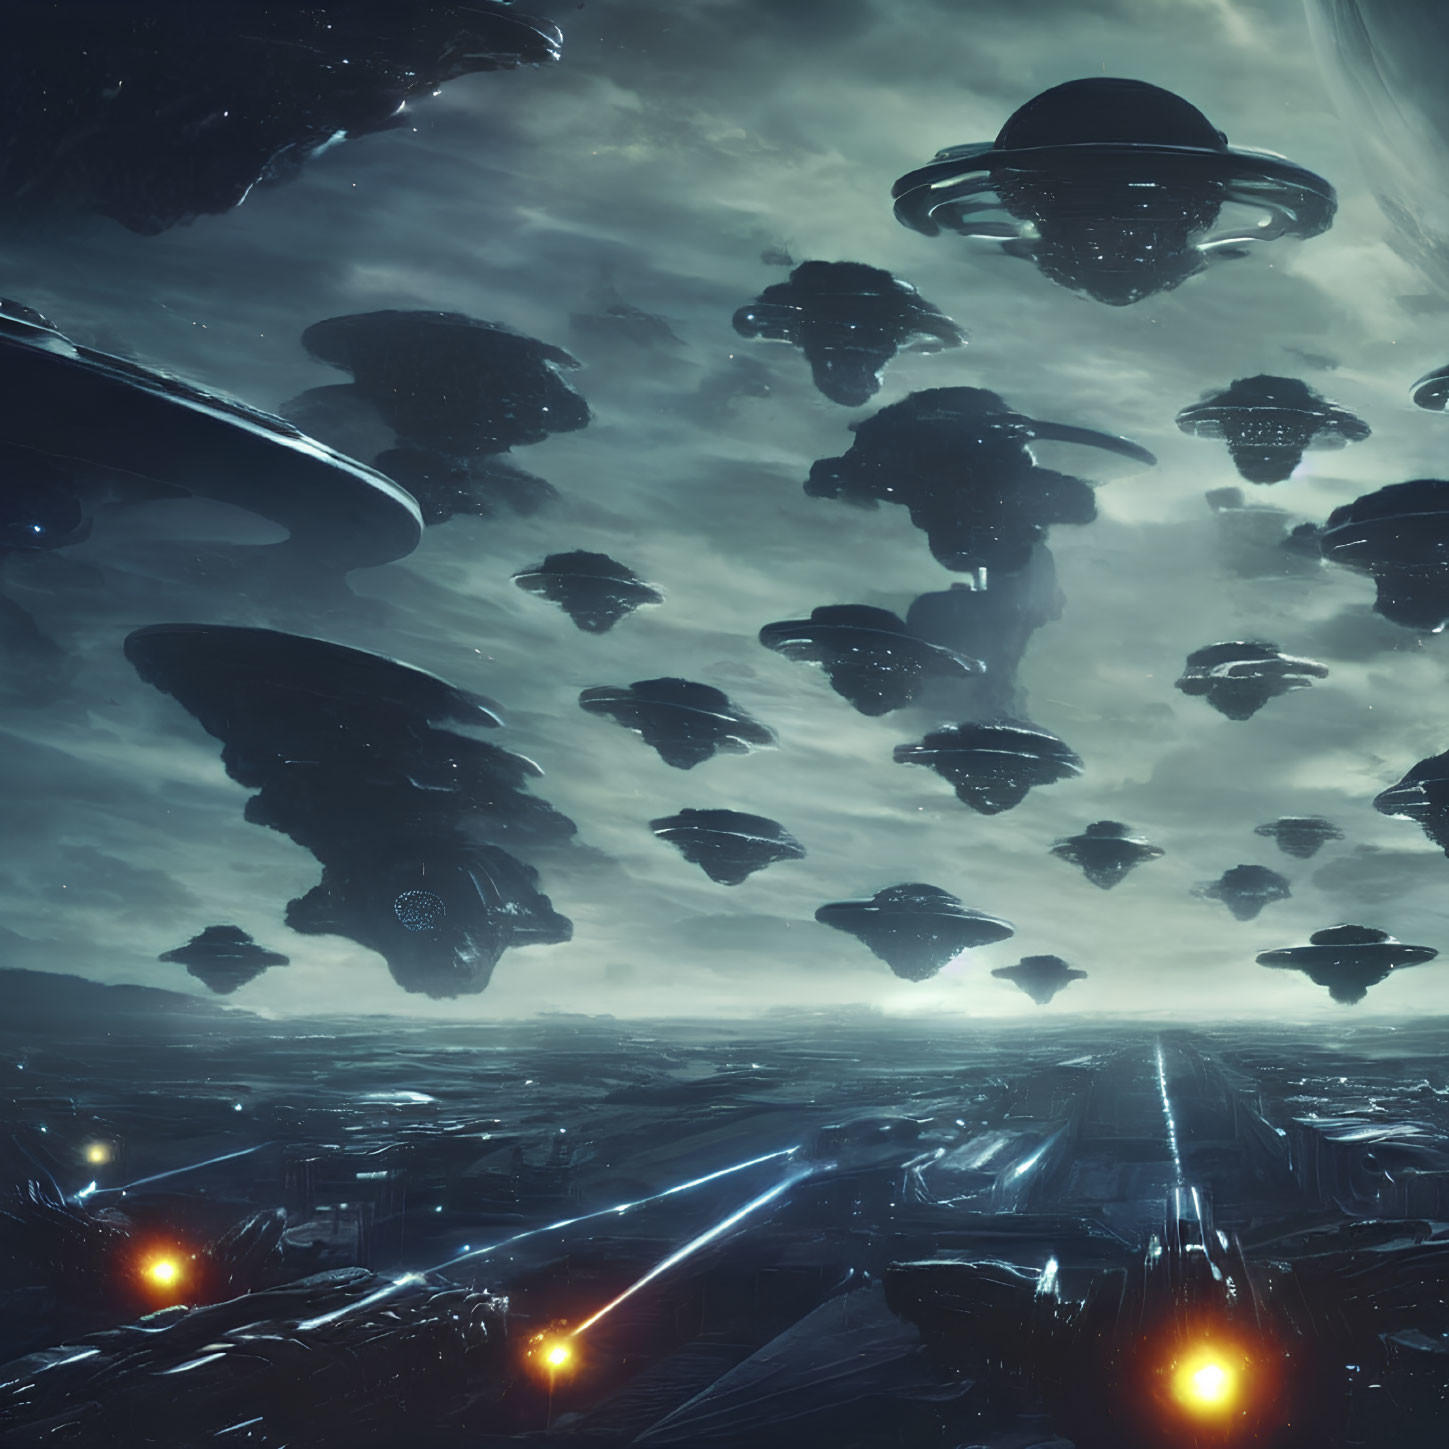 Futuristic cityscape with flying saucers and towering architectures under a starlit sky